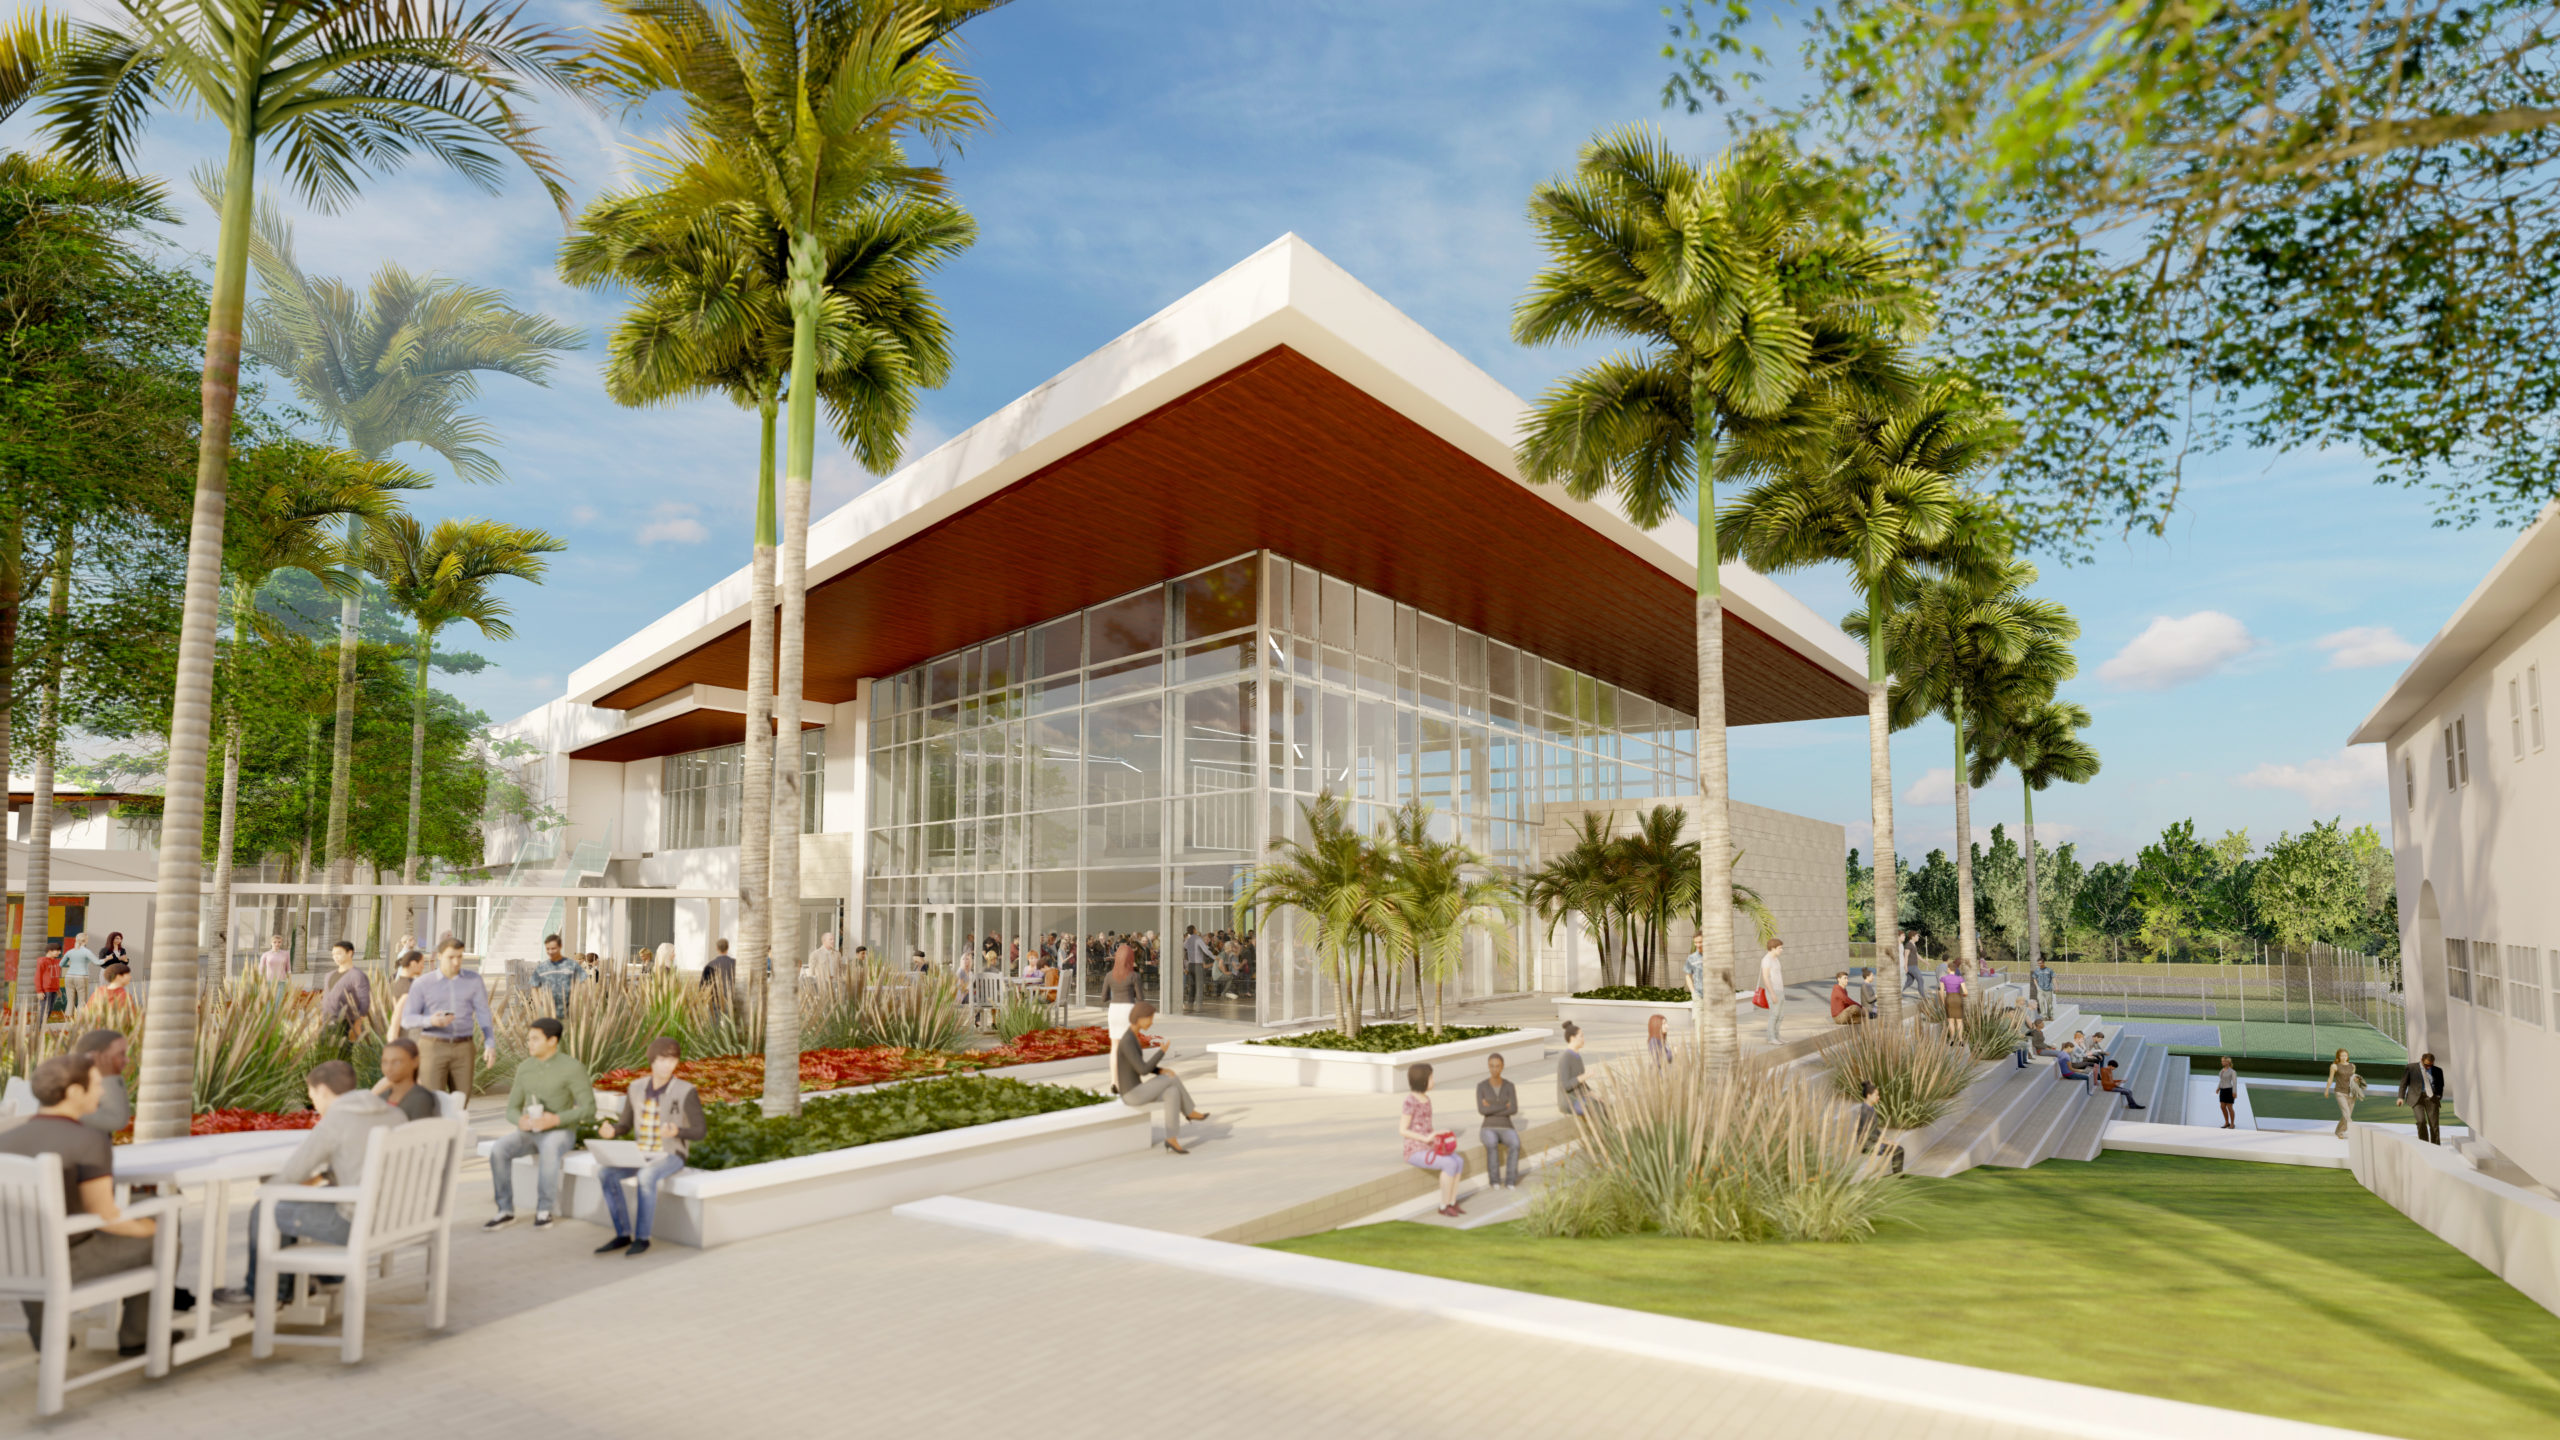 A rendering of what our Student Life Center will look like